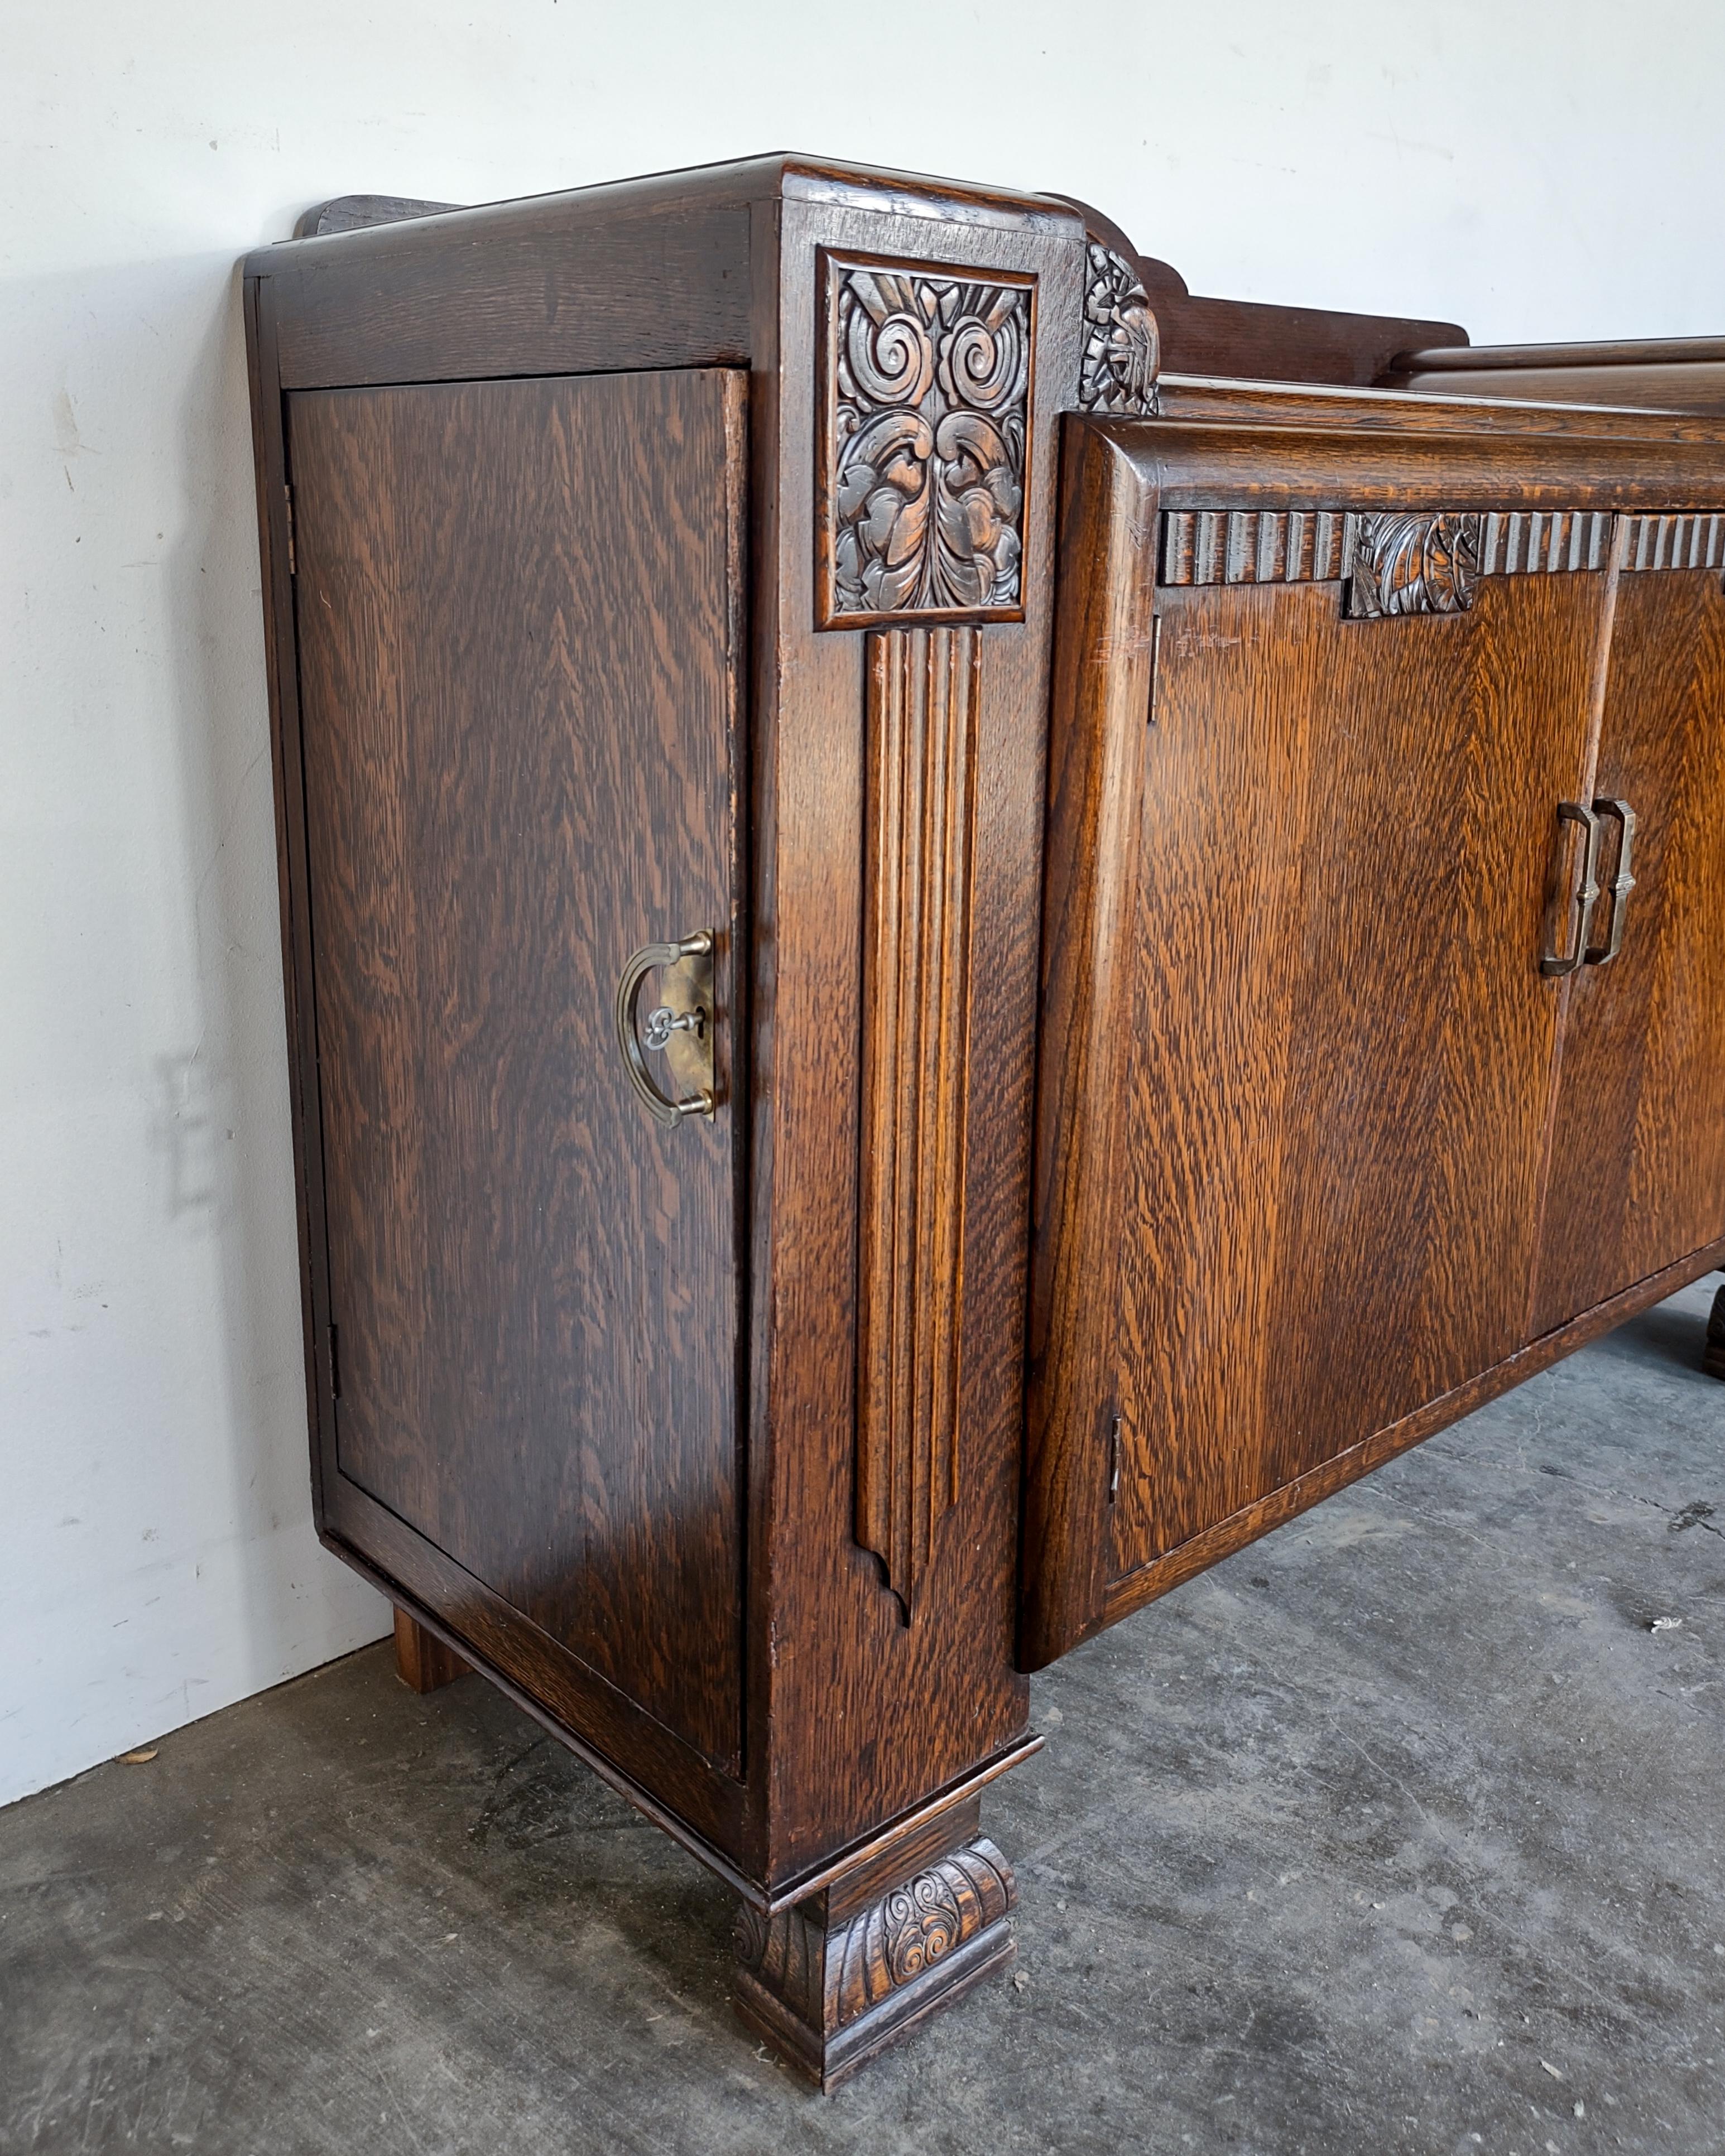 Art Deco quarter sawn tiger oak cabinet. Stunning wood grain covering entire body and hand carved details. Interior features shelving areas and two drawers. Each side piece contains 